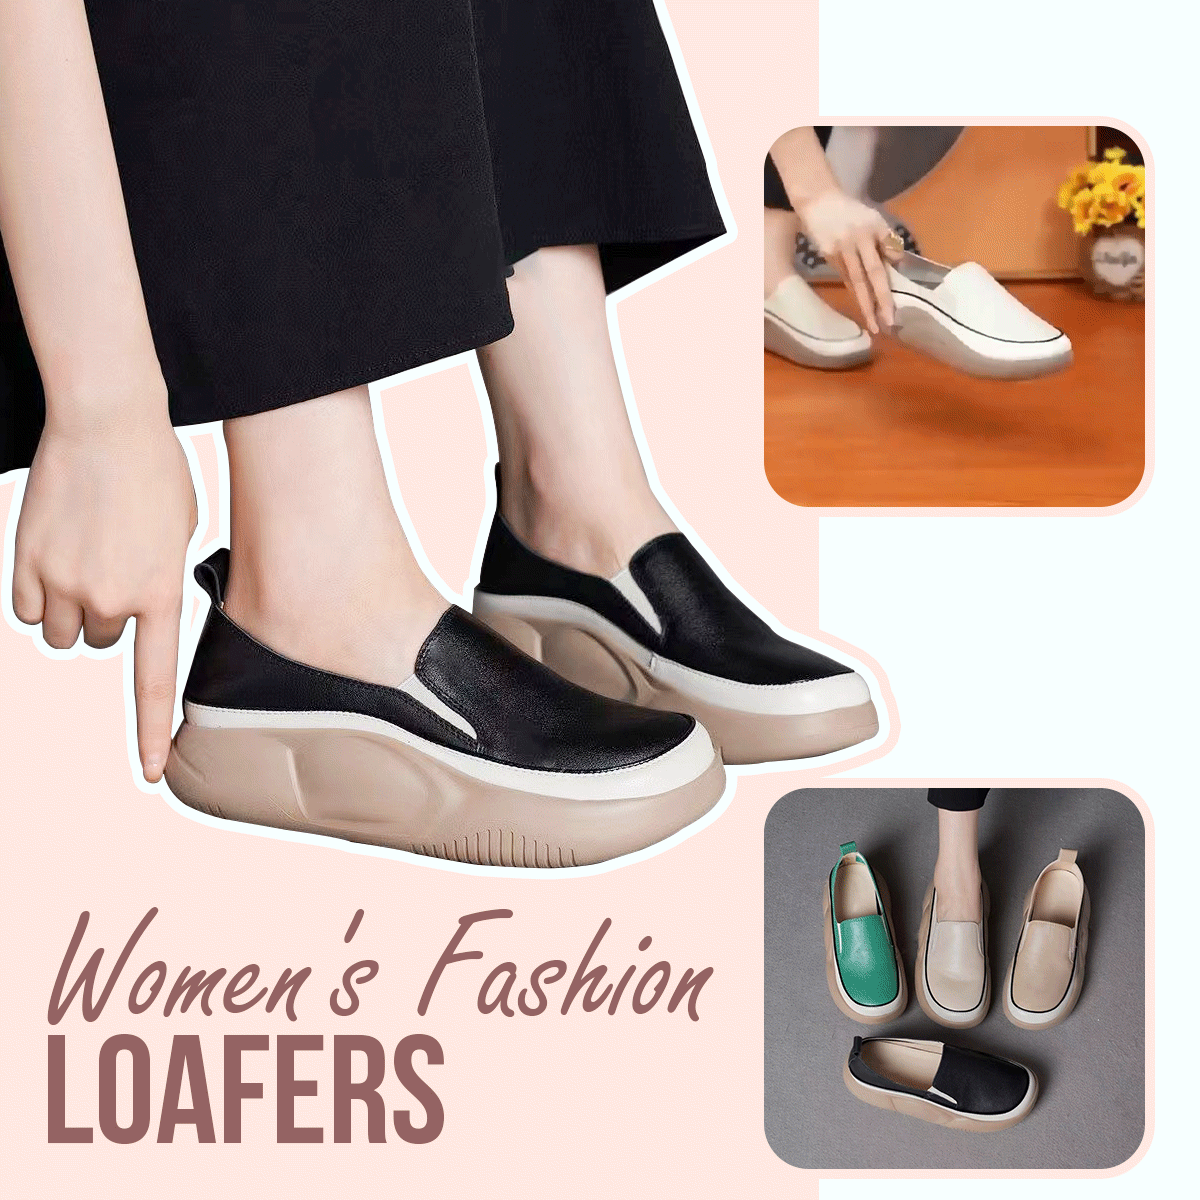 Women's Fashion Loafers